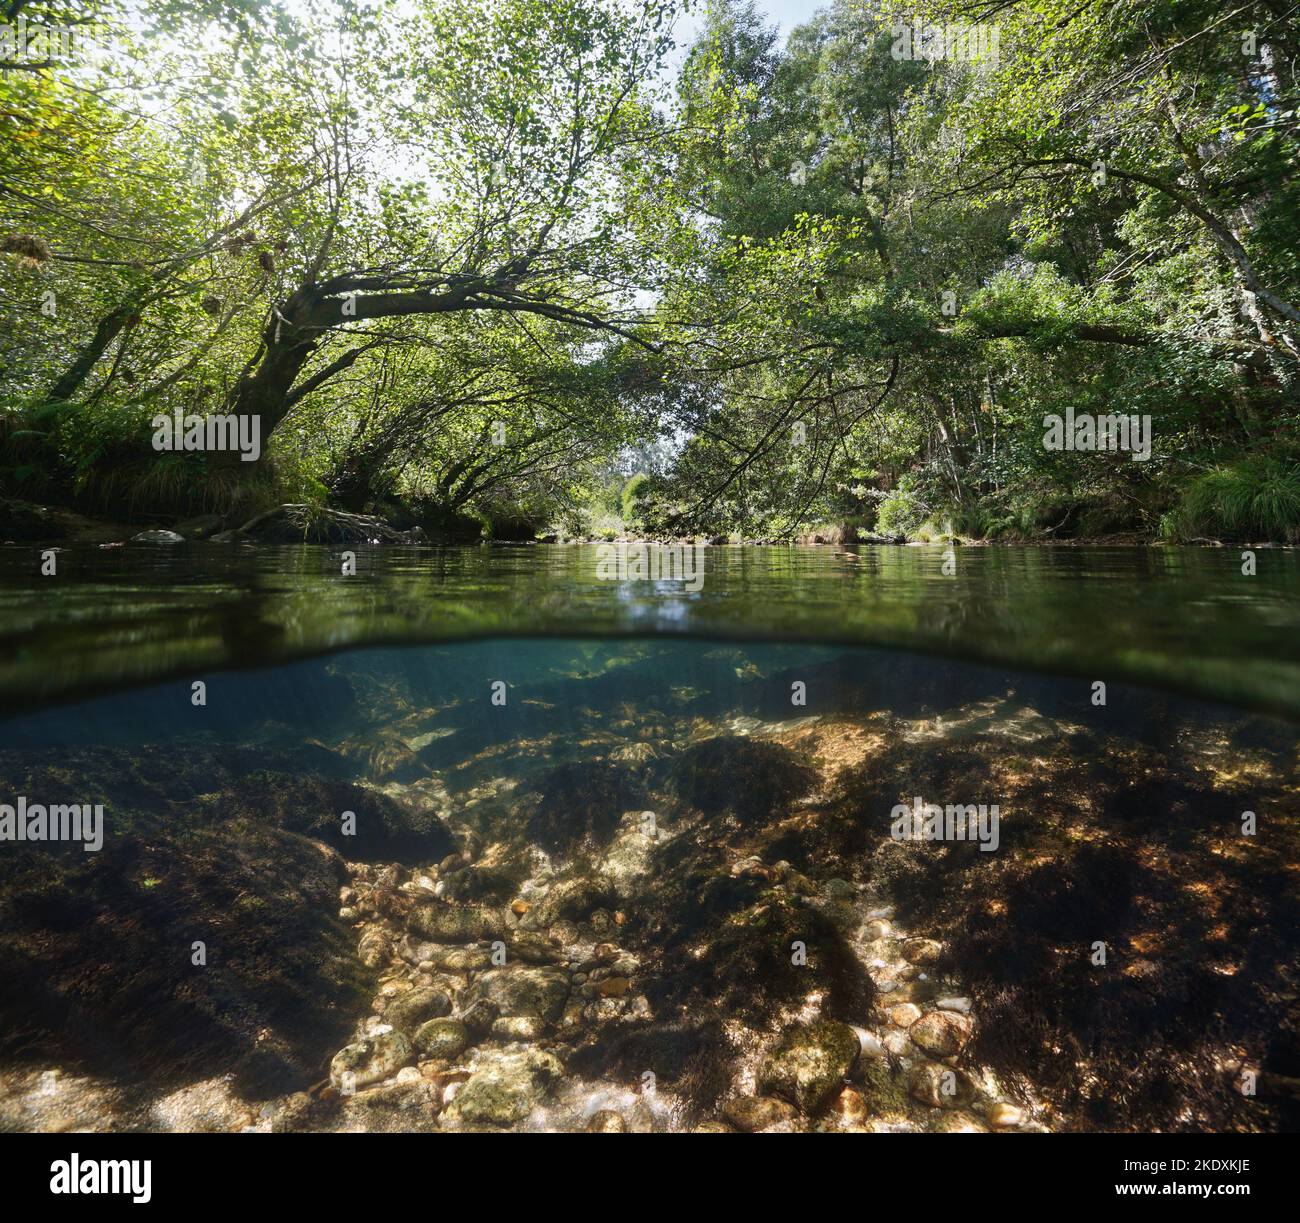 River and trees foliage, split level view over and under water surface, Spain, Galicia, Oitaven river, Pontevedra province Stock Photo